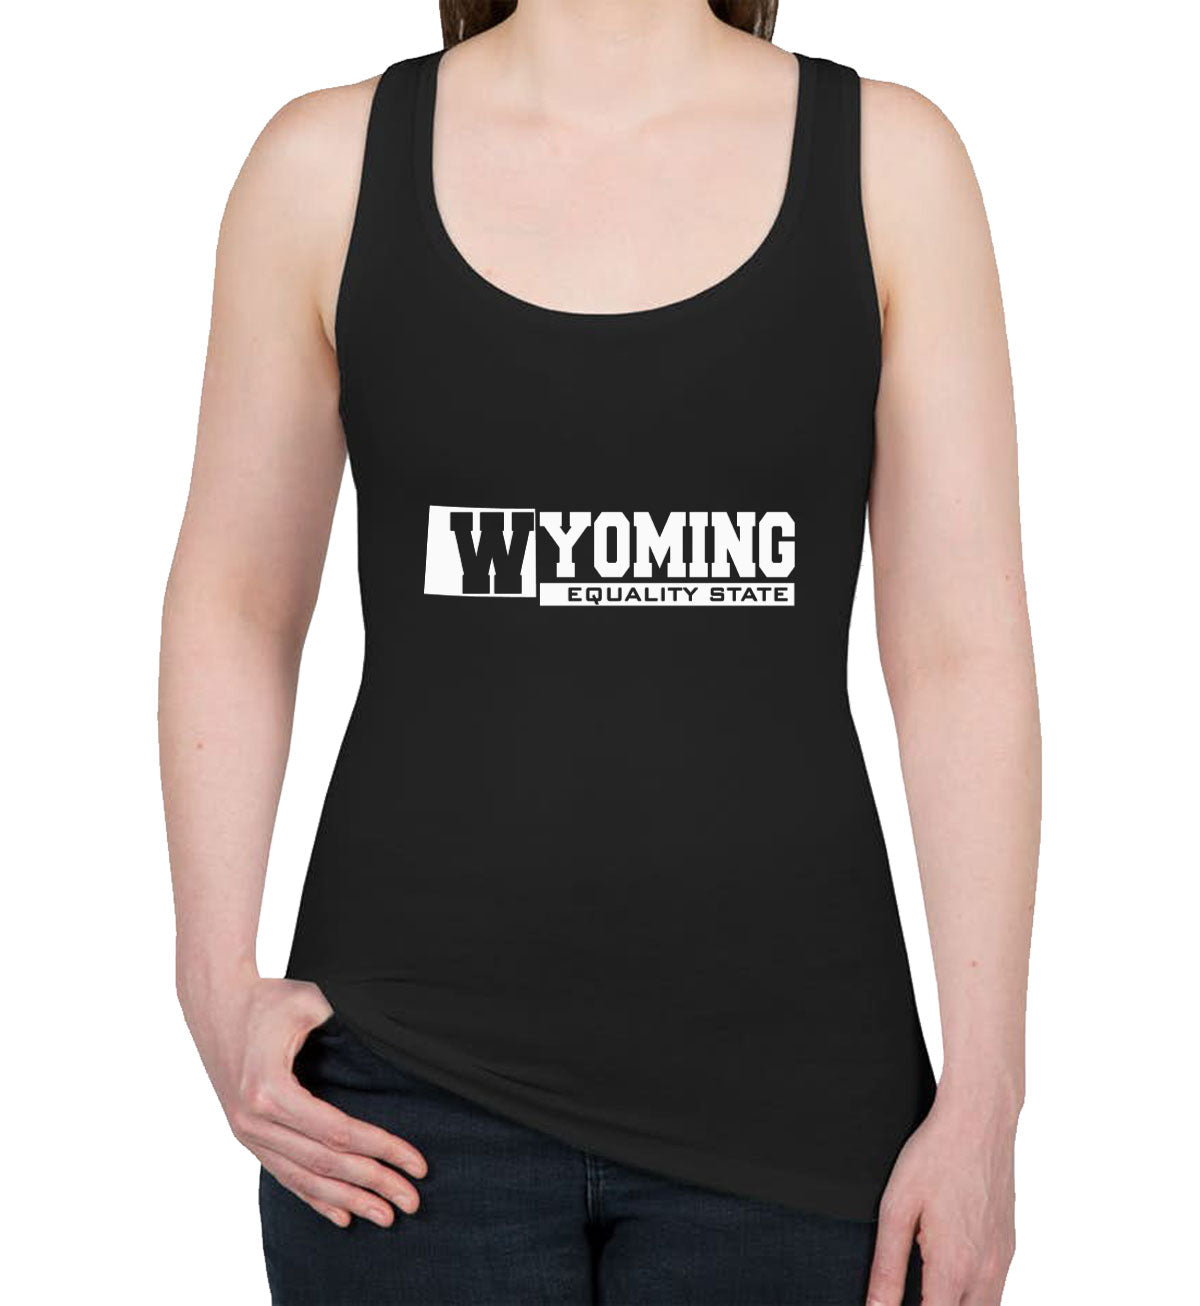 Wyoming Equality State Women's Racerback Tank Top